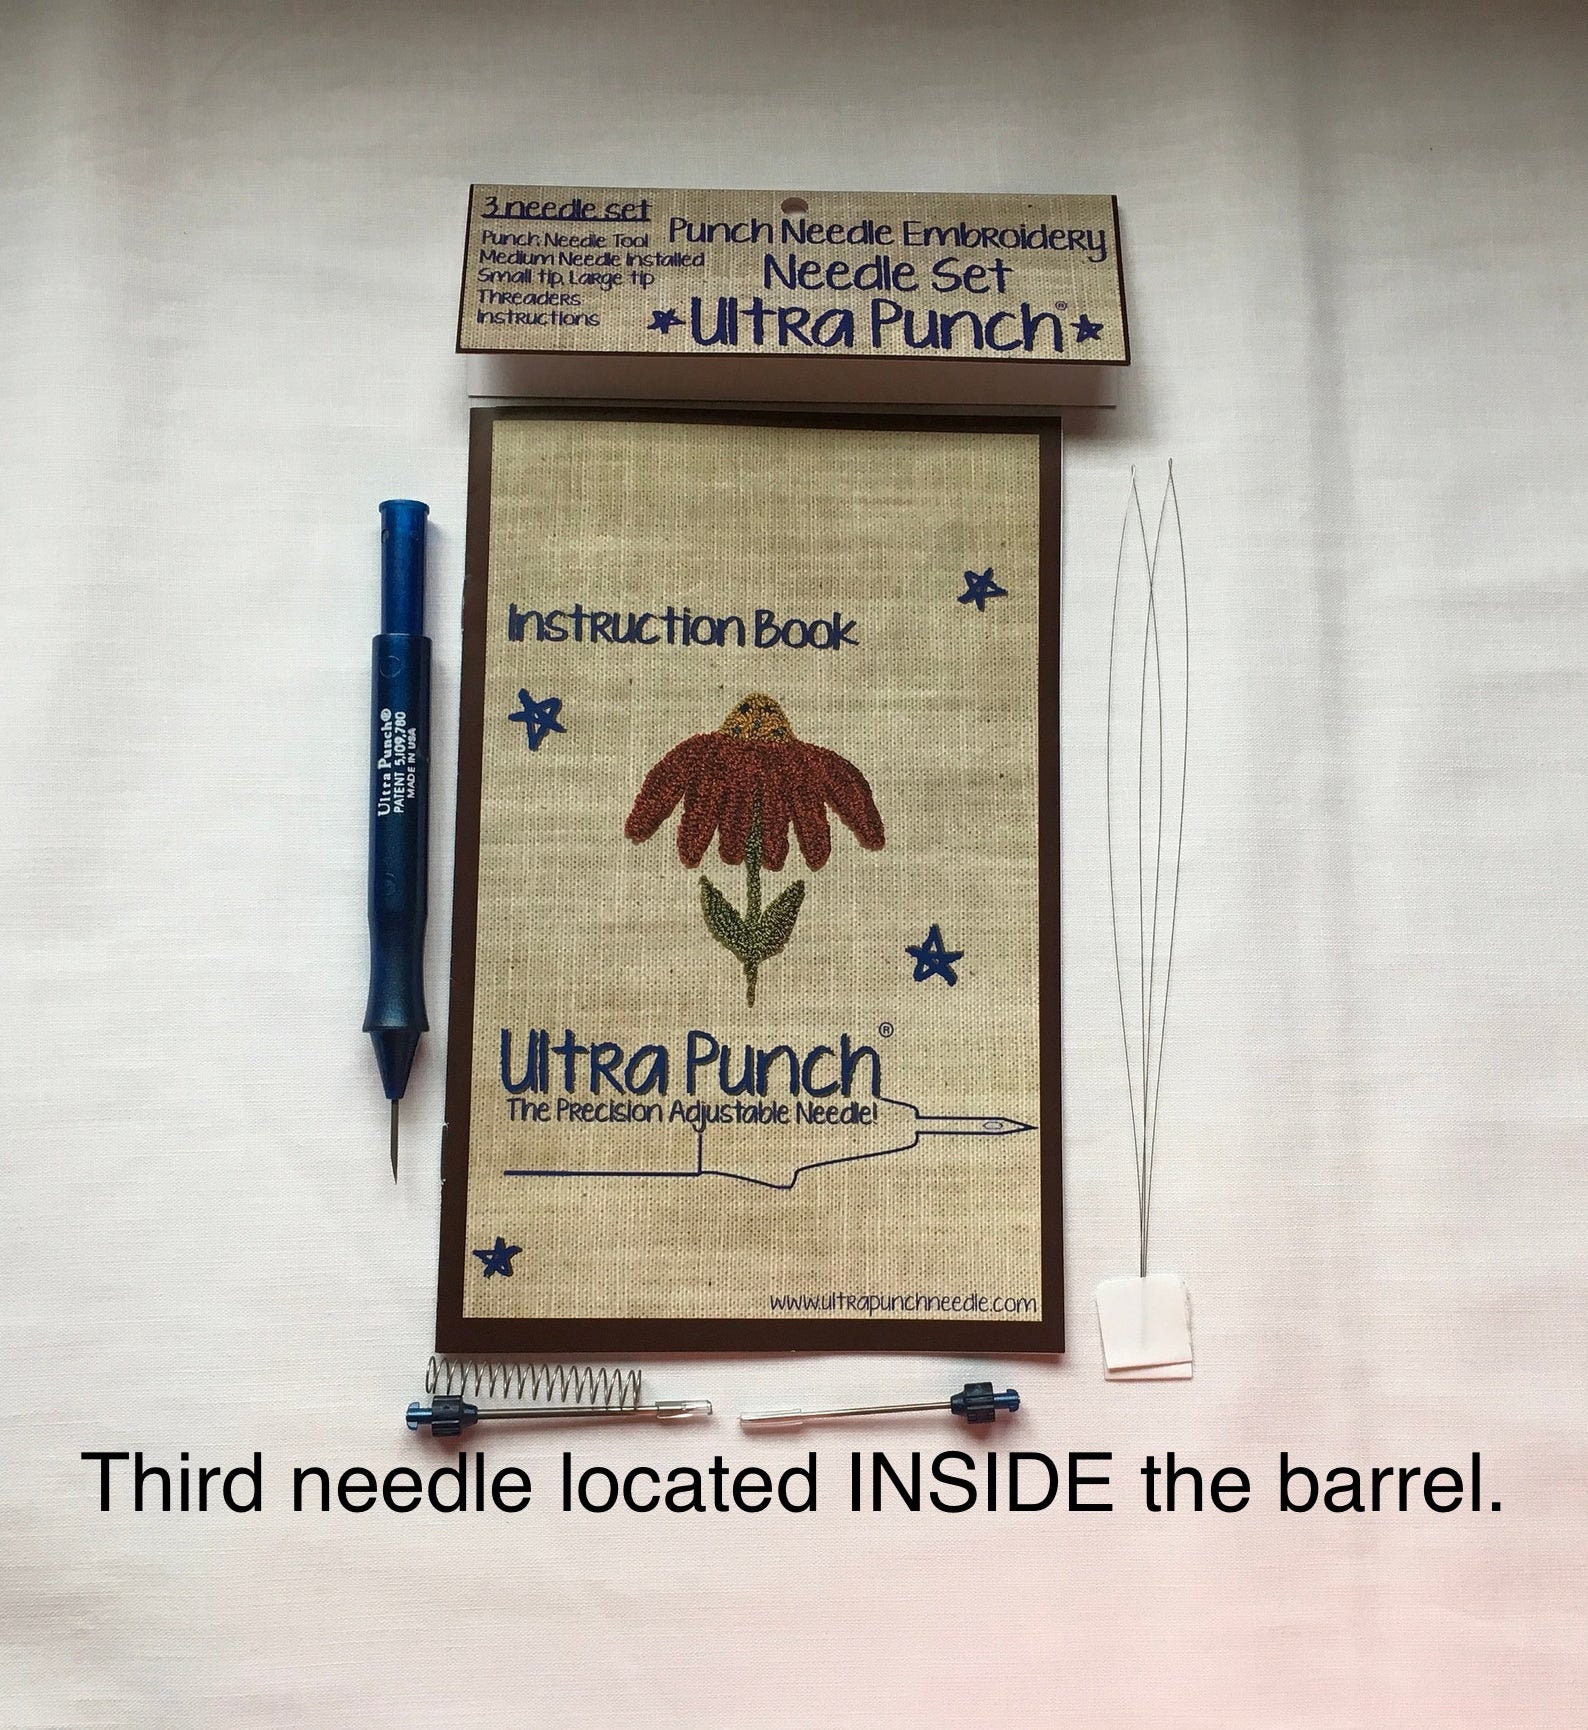 Ultra Punch Needle Three Piece Set Small Medium Large Tool Complete Needle  Set Needlepunch Needlework Embroidery 